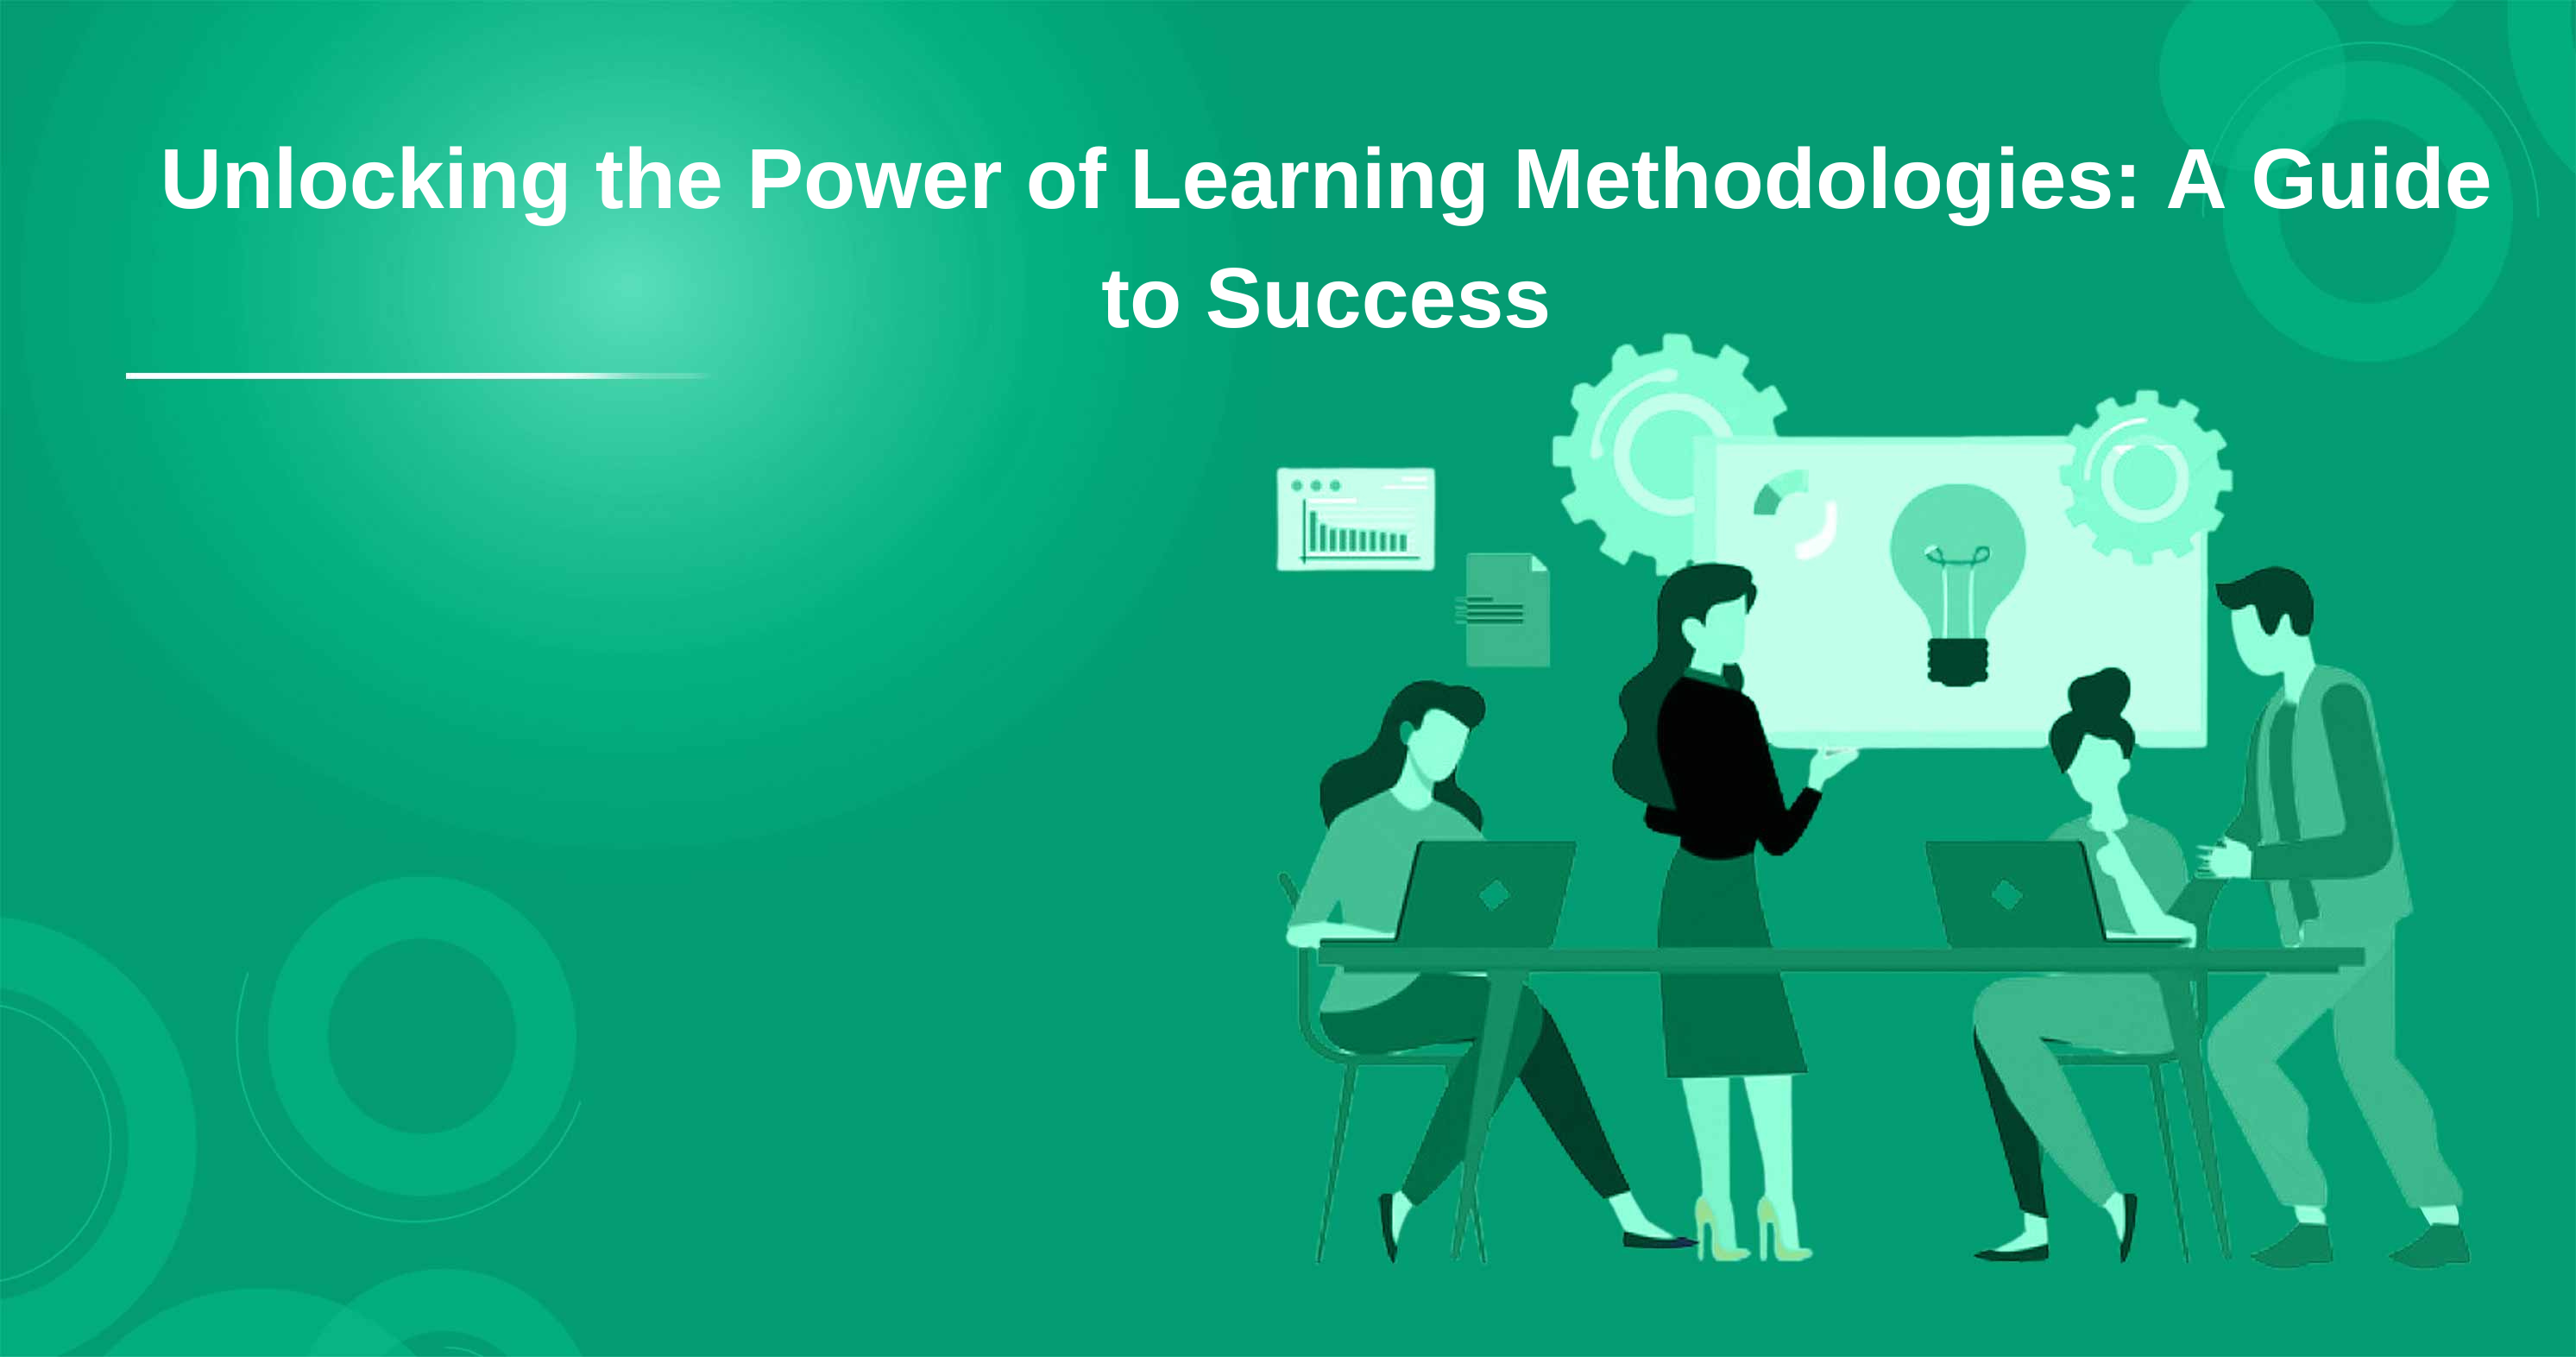 Unlocking the Power of Learning Methodologies: A Guide to Success